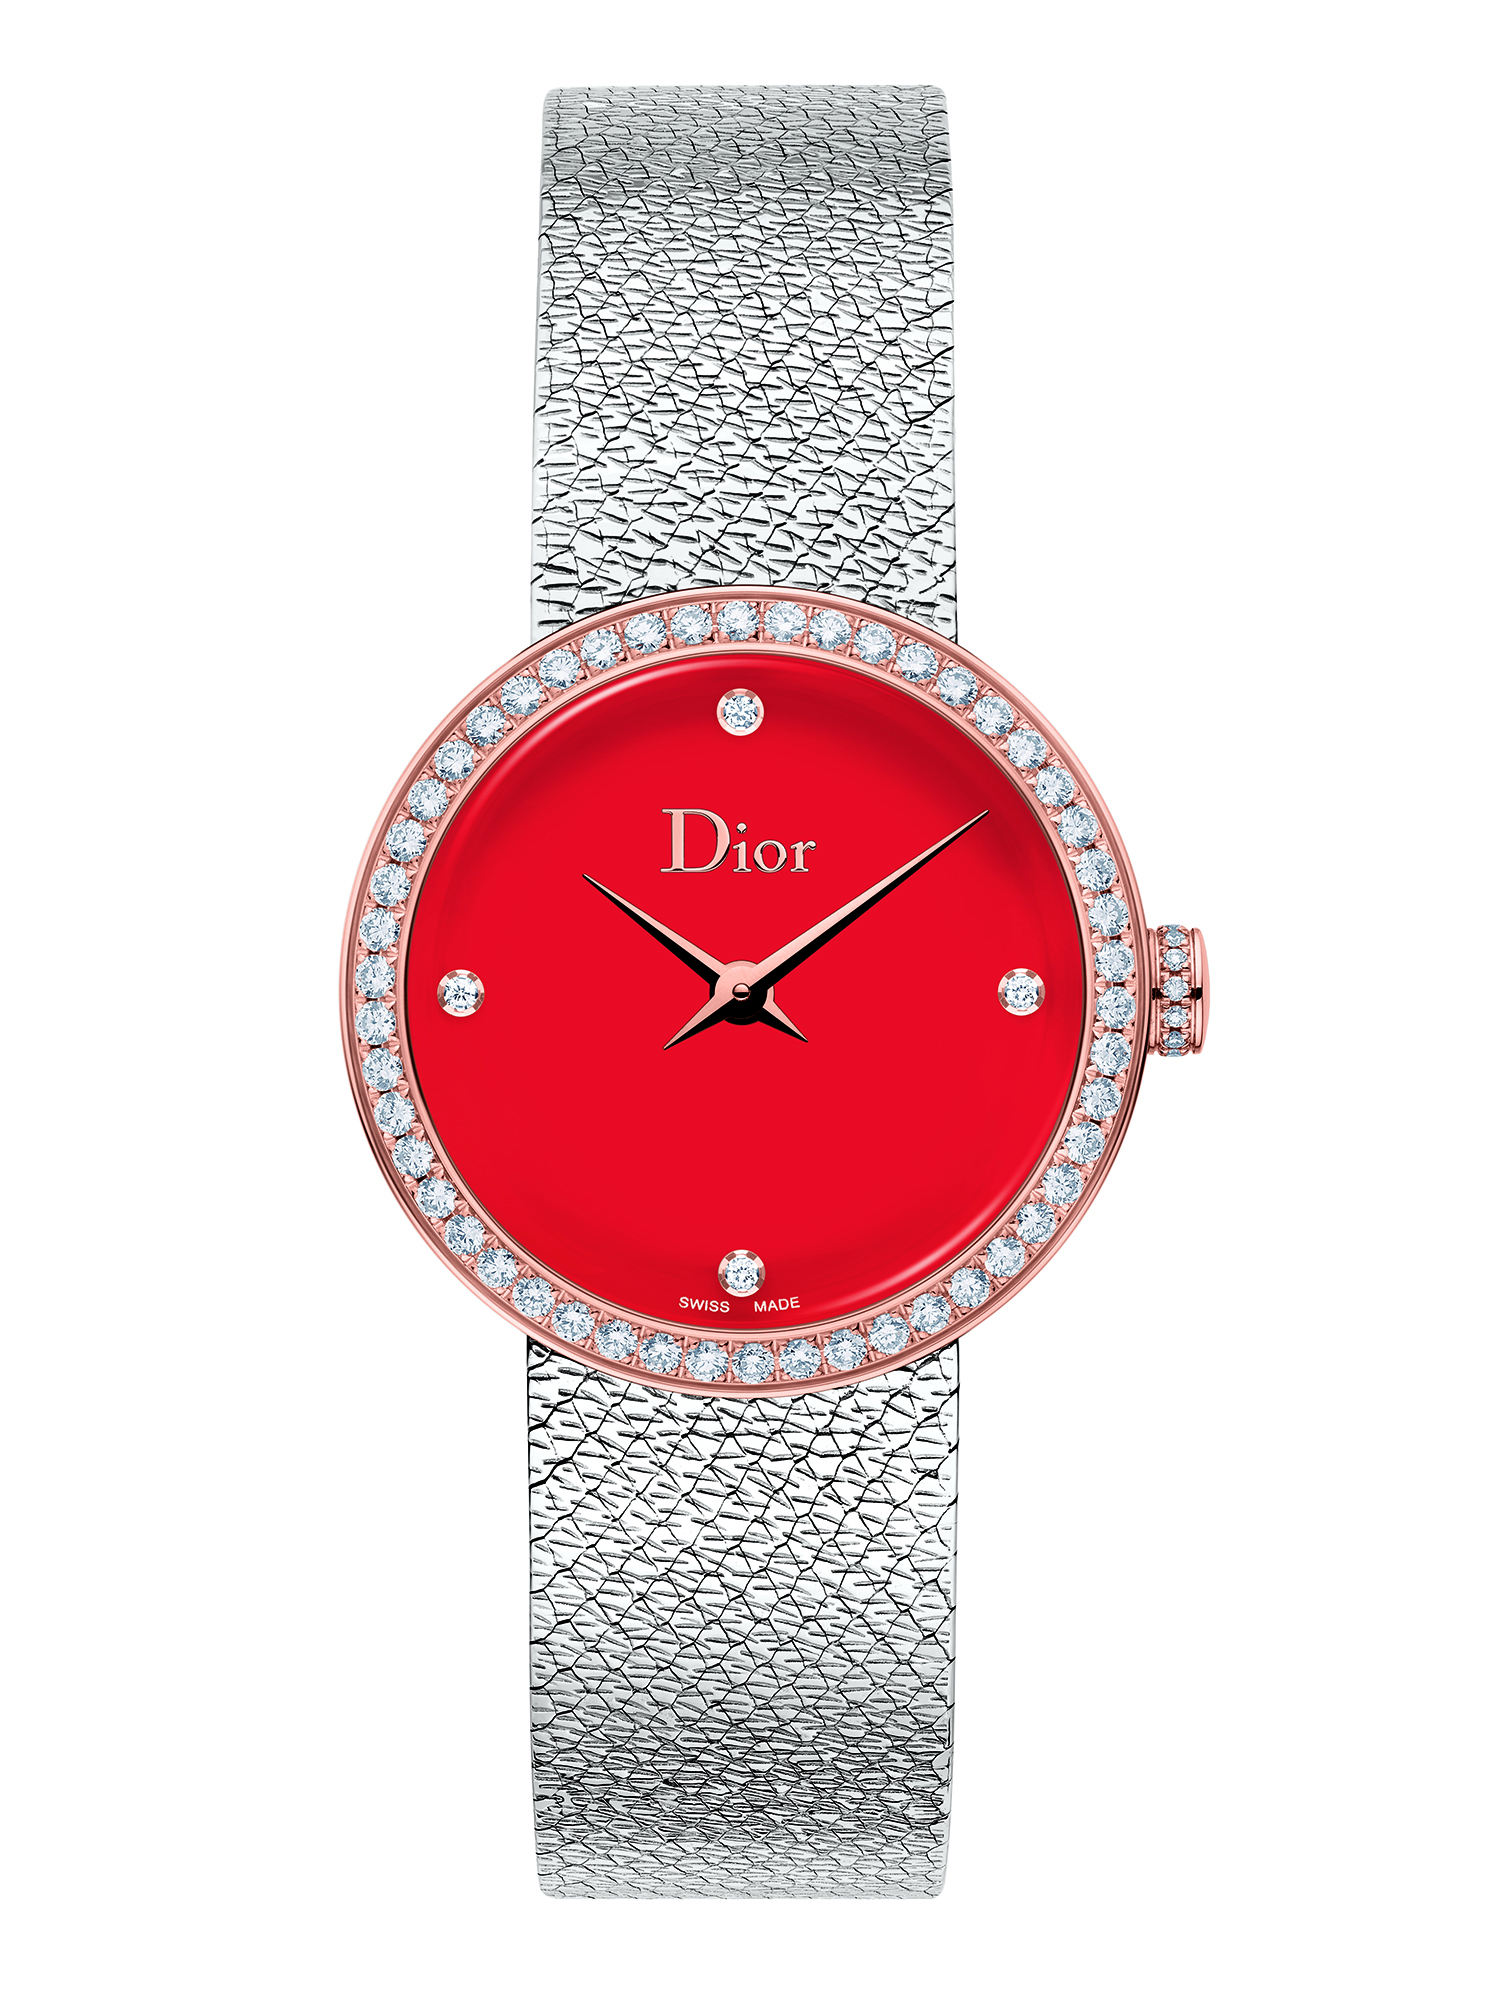 La d de dior satine watch in steel pink gold, diamonds and red lacquer, £6,200, by dior watches.